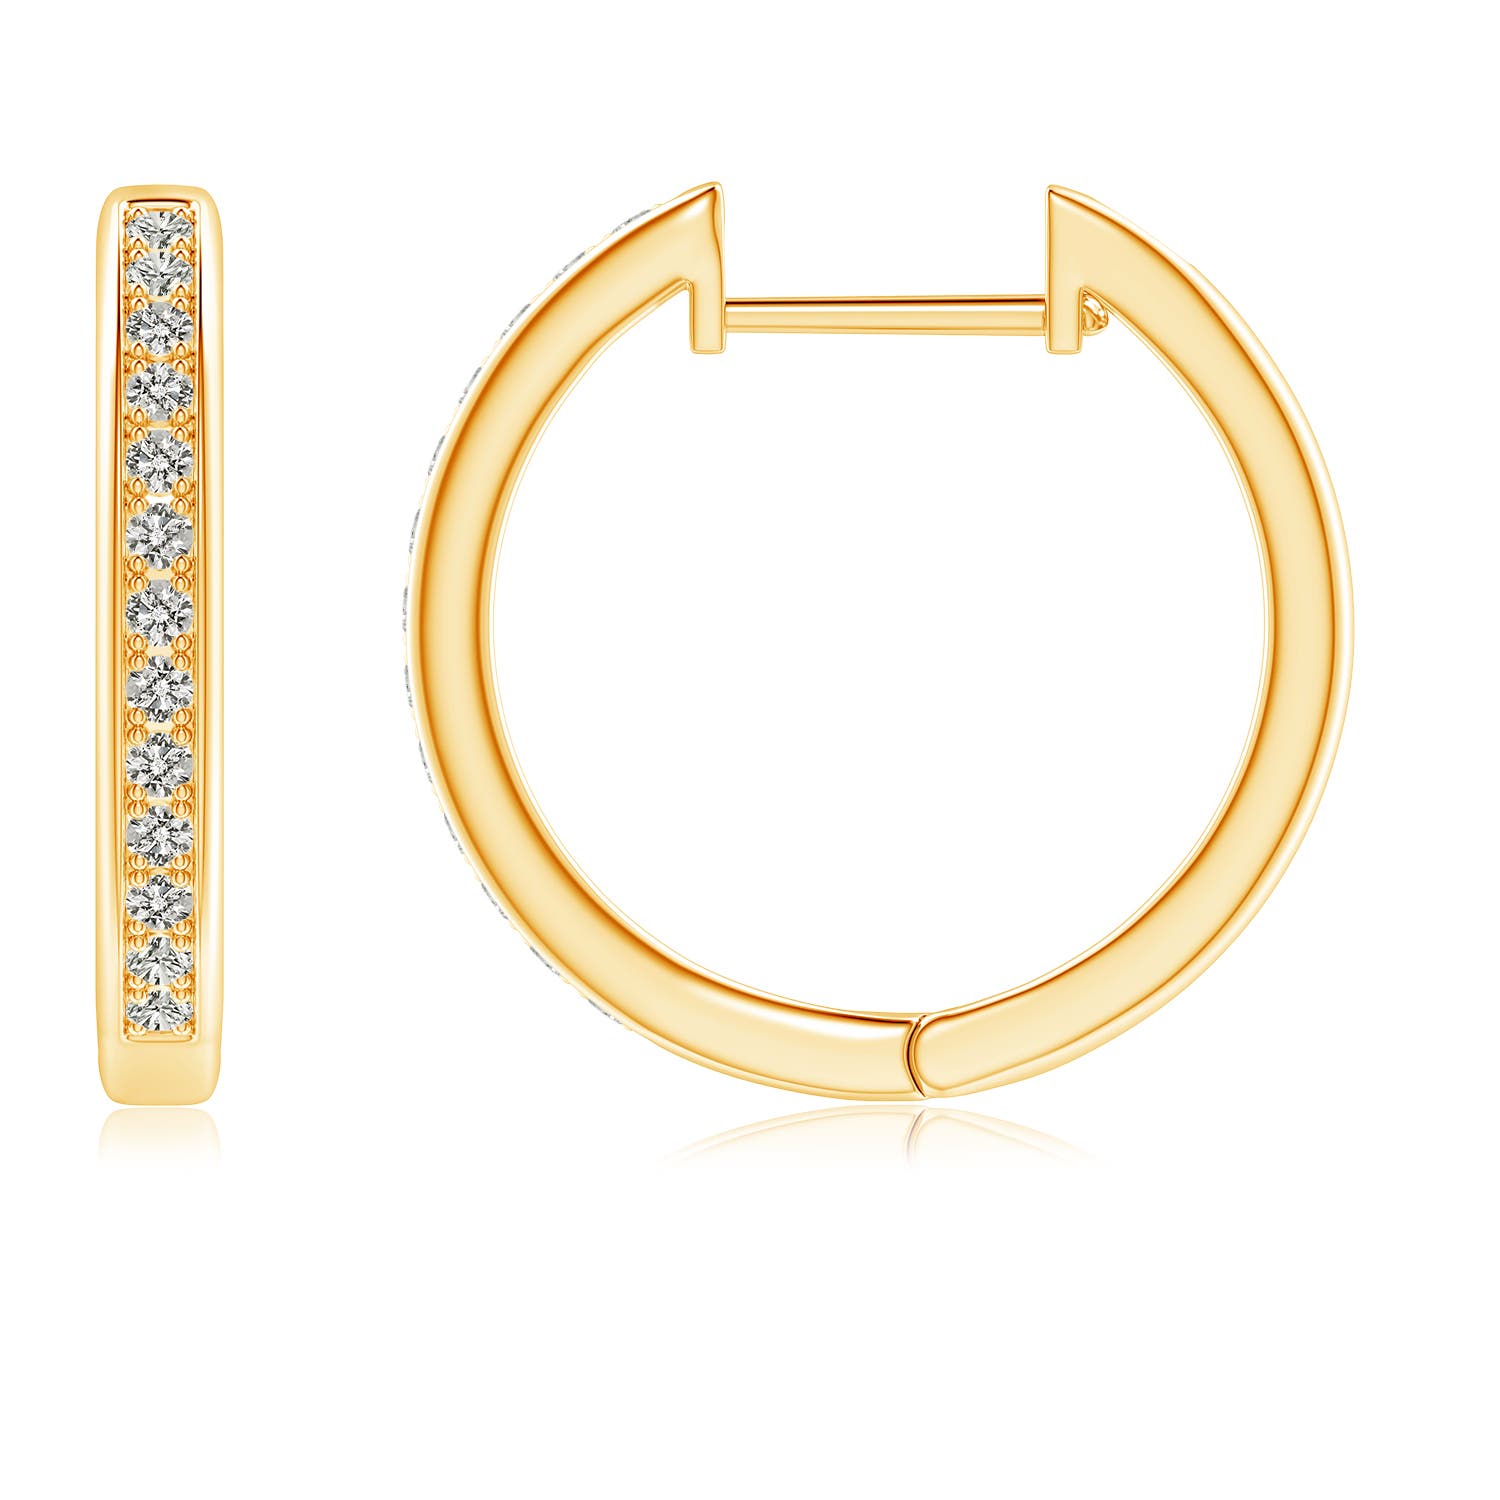 K, I3 / 0.34 CT / 14 KT Yellow Gold